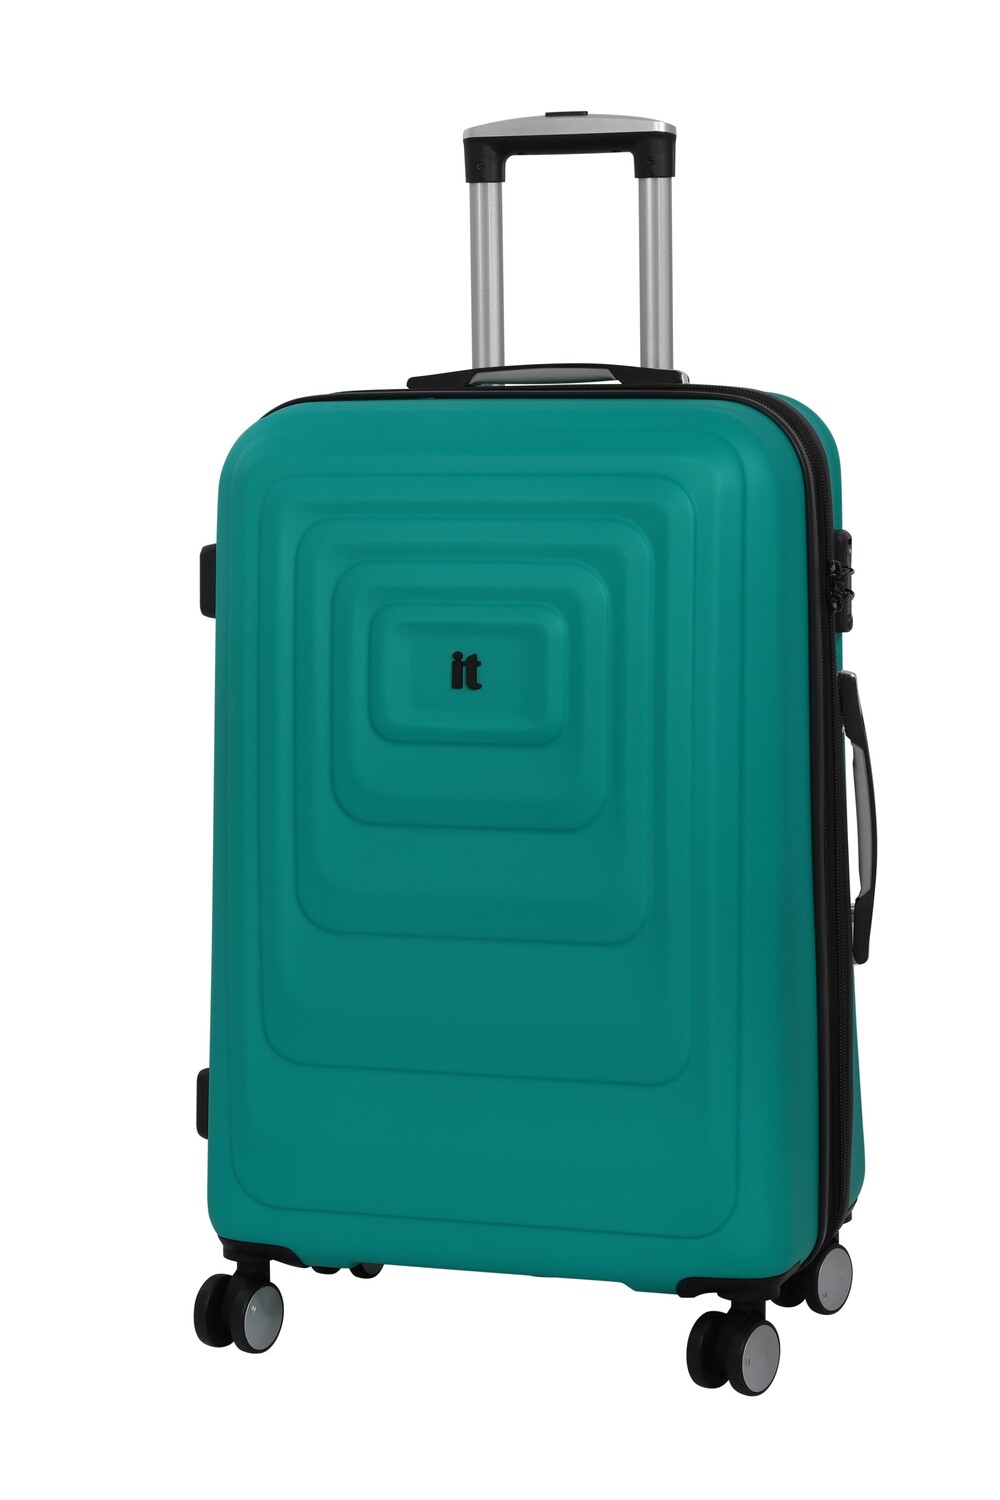 IT LUGGAGE MESMERIZE 26" STRONG TROLLEY CERAMIC